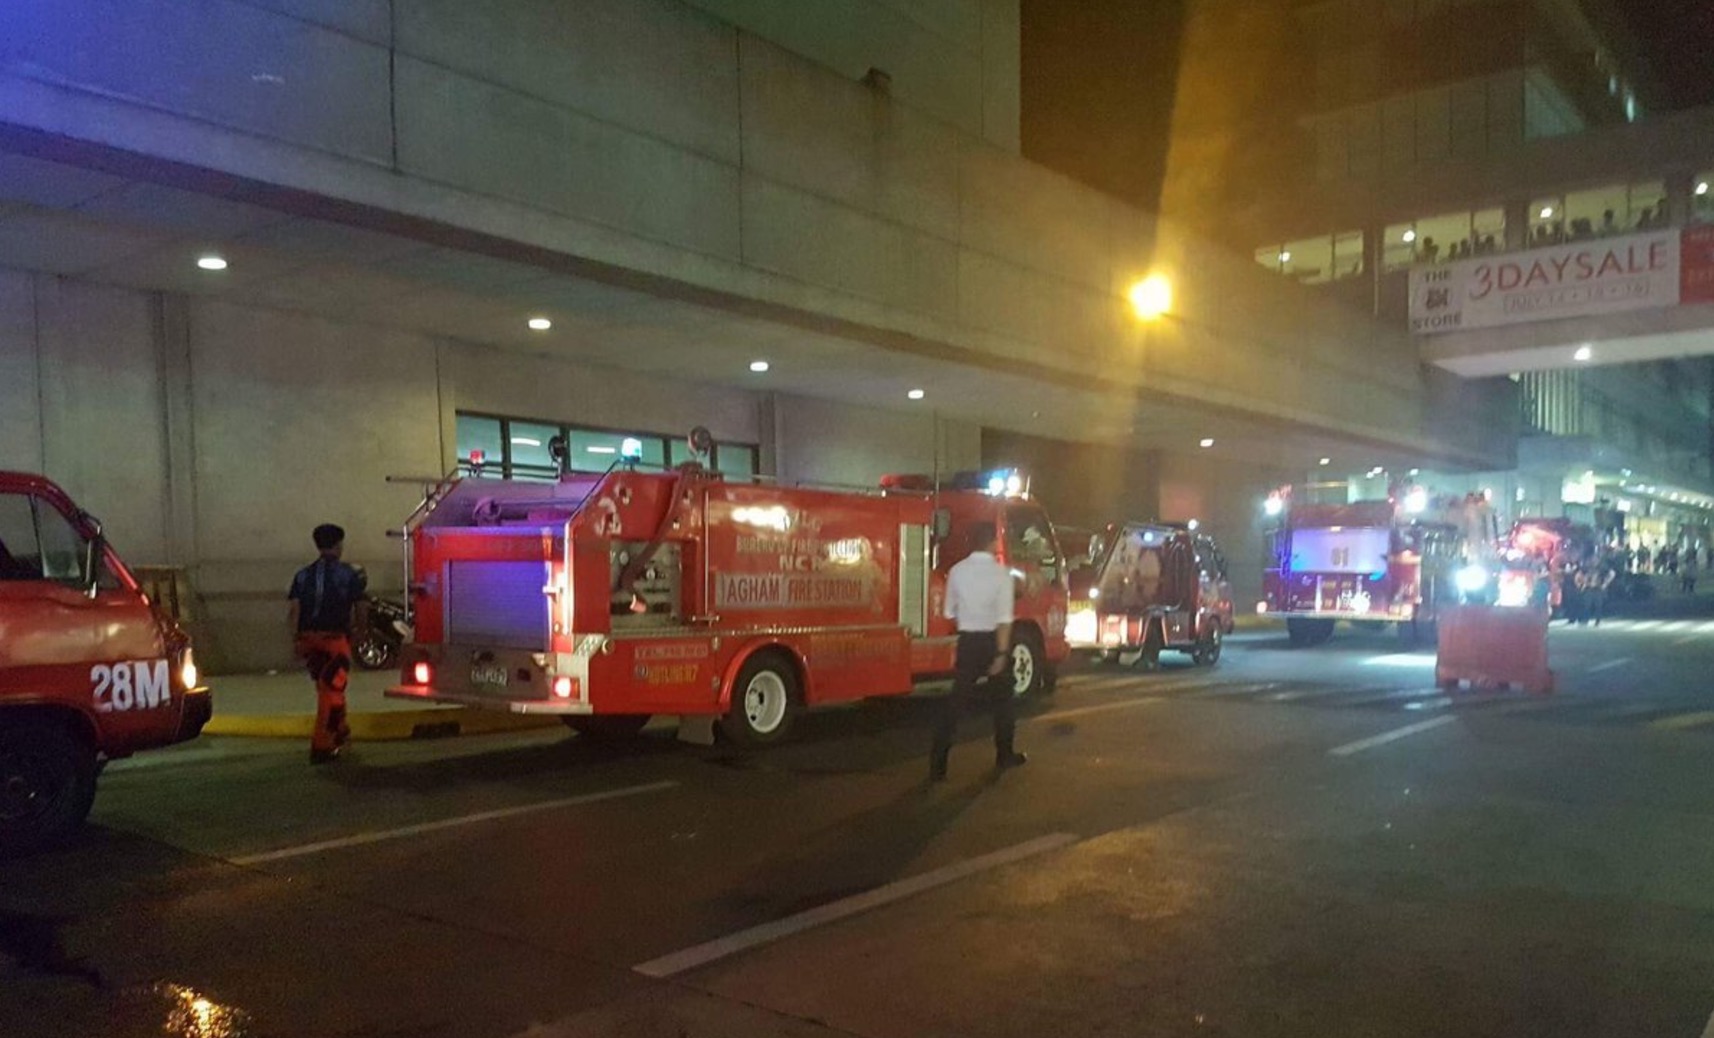 Fire trucks at the scene of the fire at SM North EDSA in Quezon City. PHOTO: Twitter / Dennis Datu for DZMM